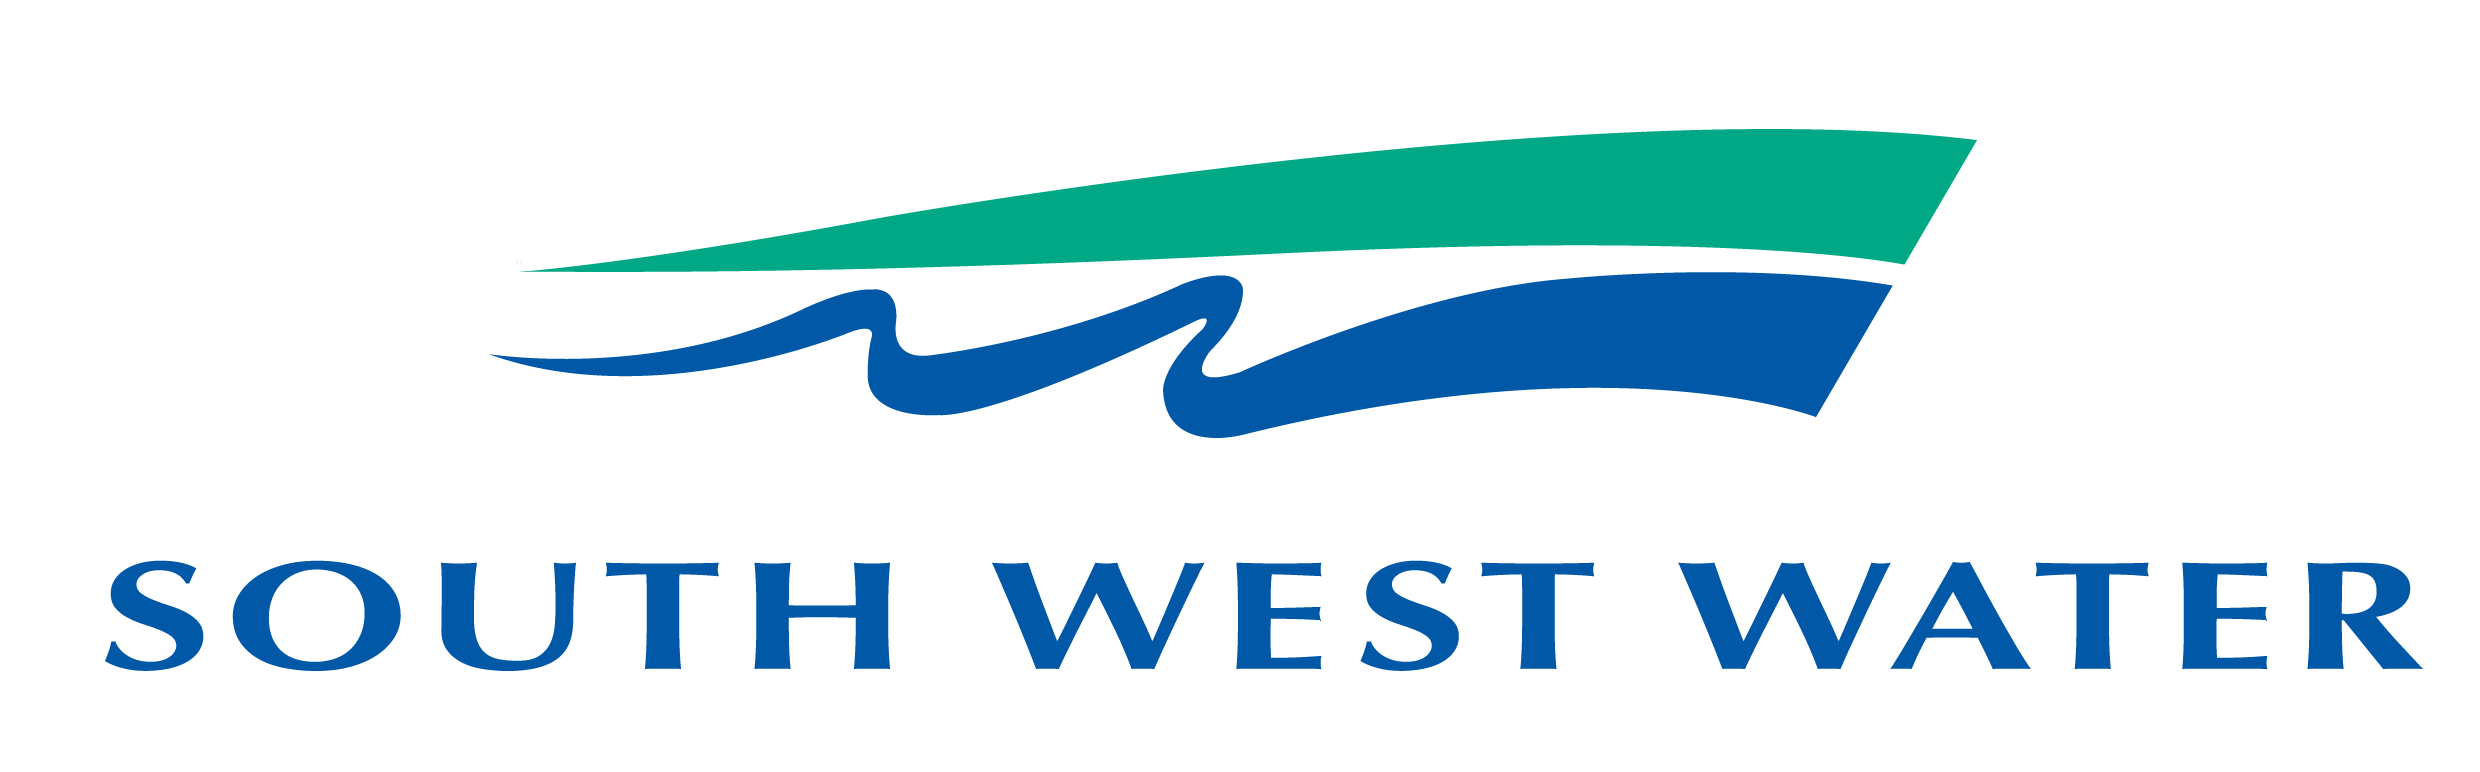 SOUTH WEST WATER (SWW)	